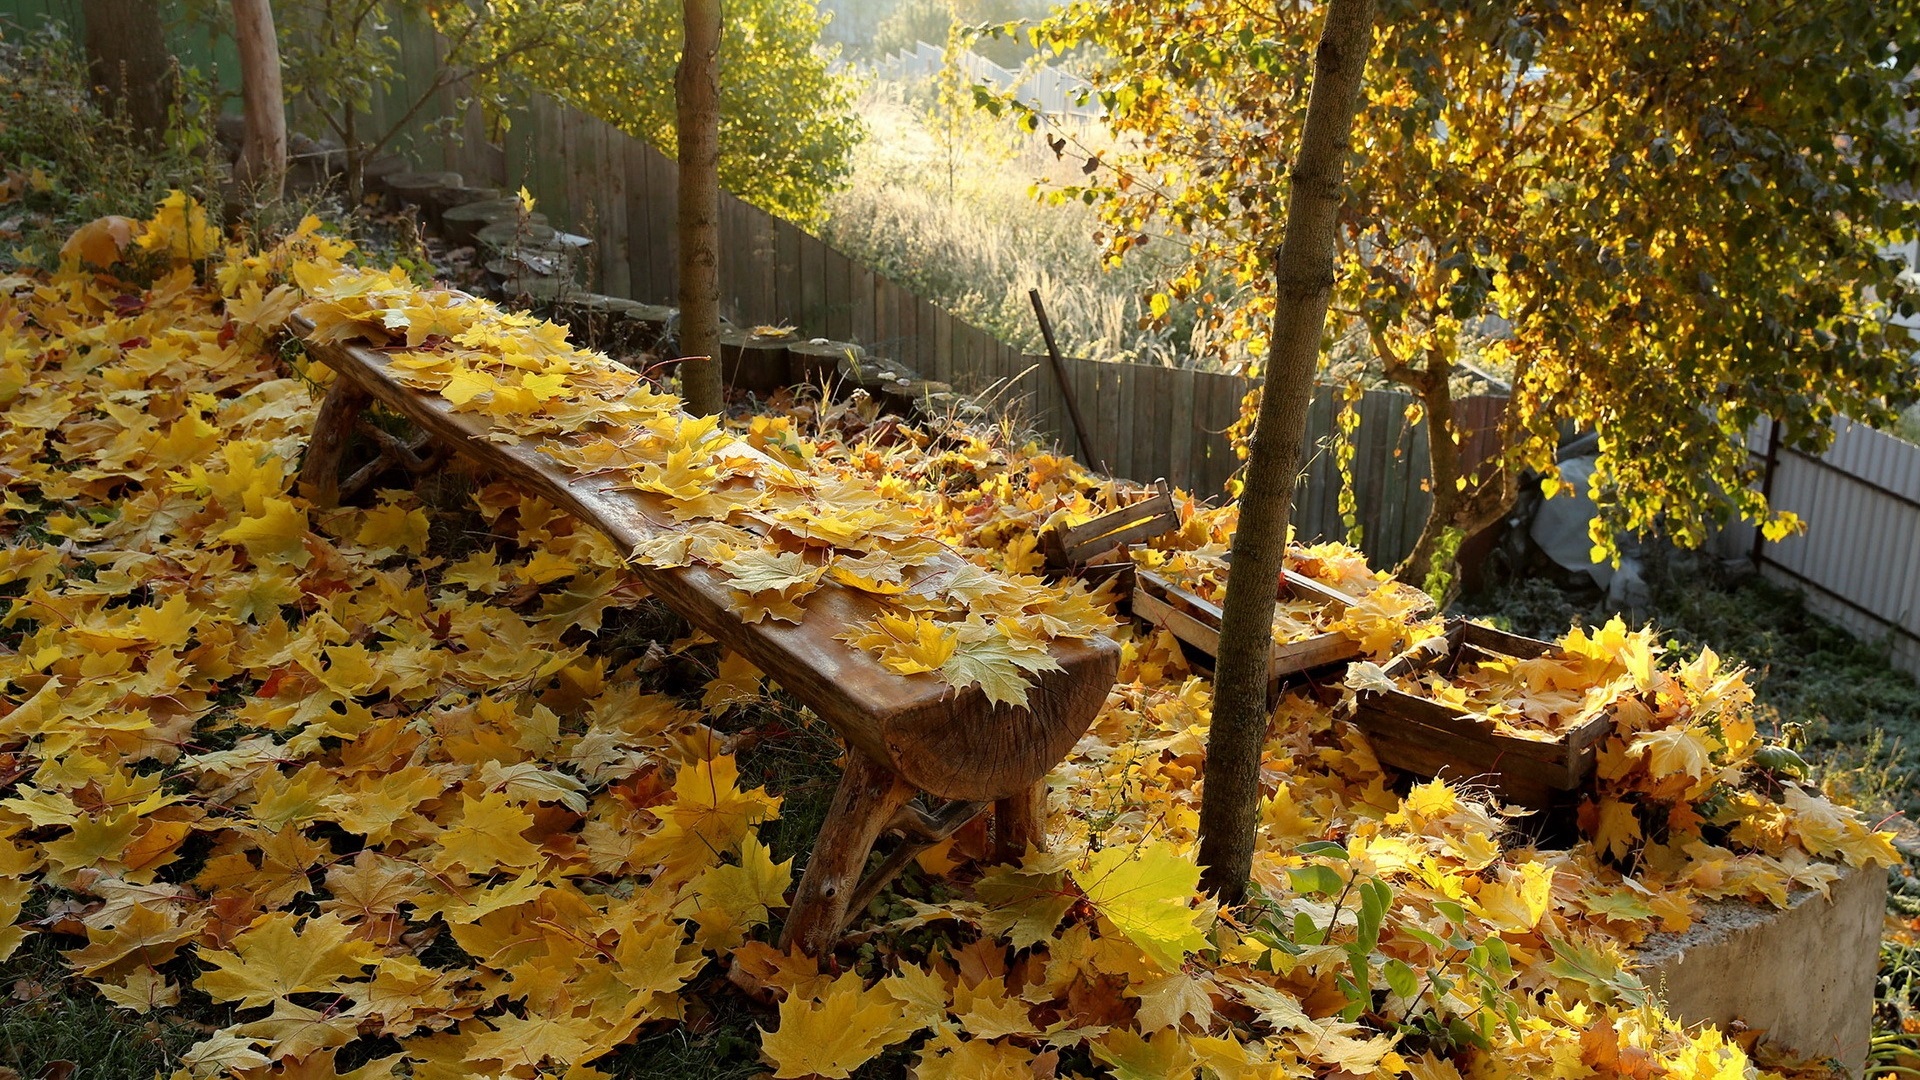 General 1920x1080 fall leaves bench sunlight trees fence nature